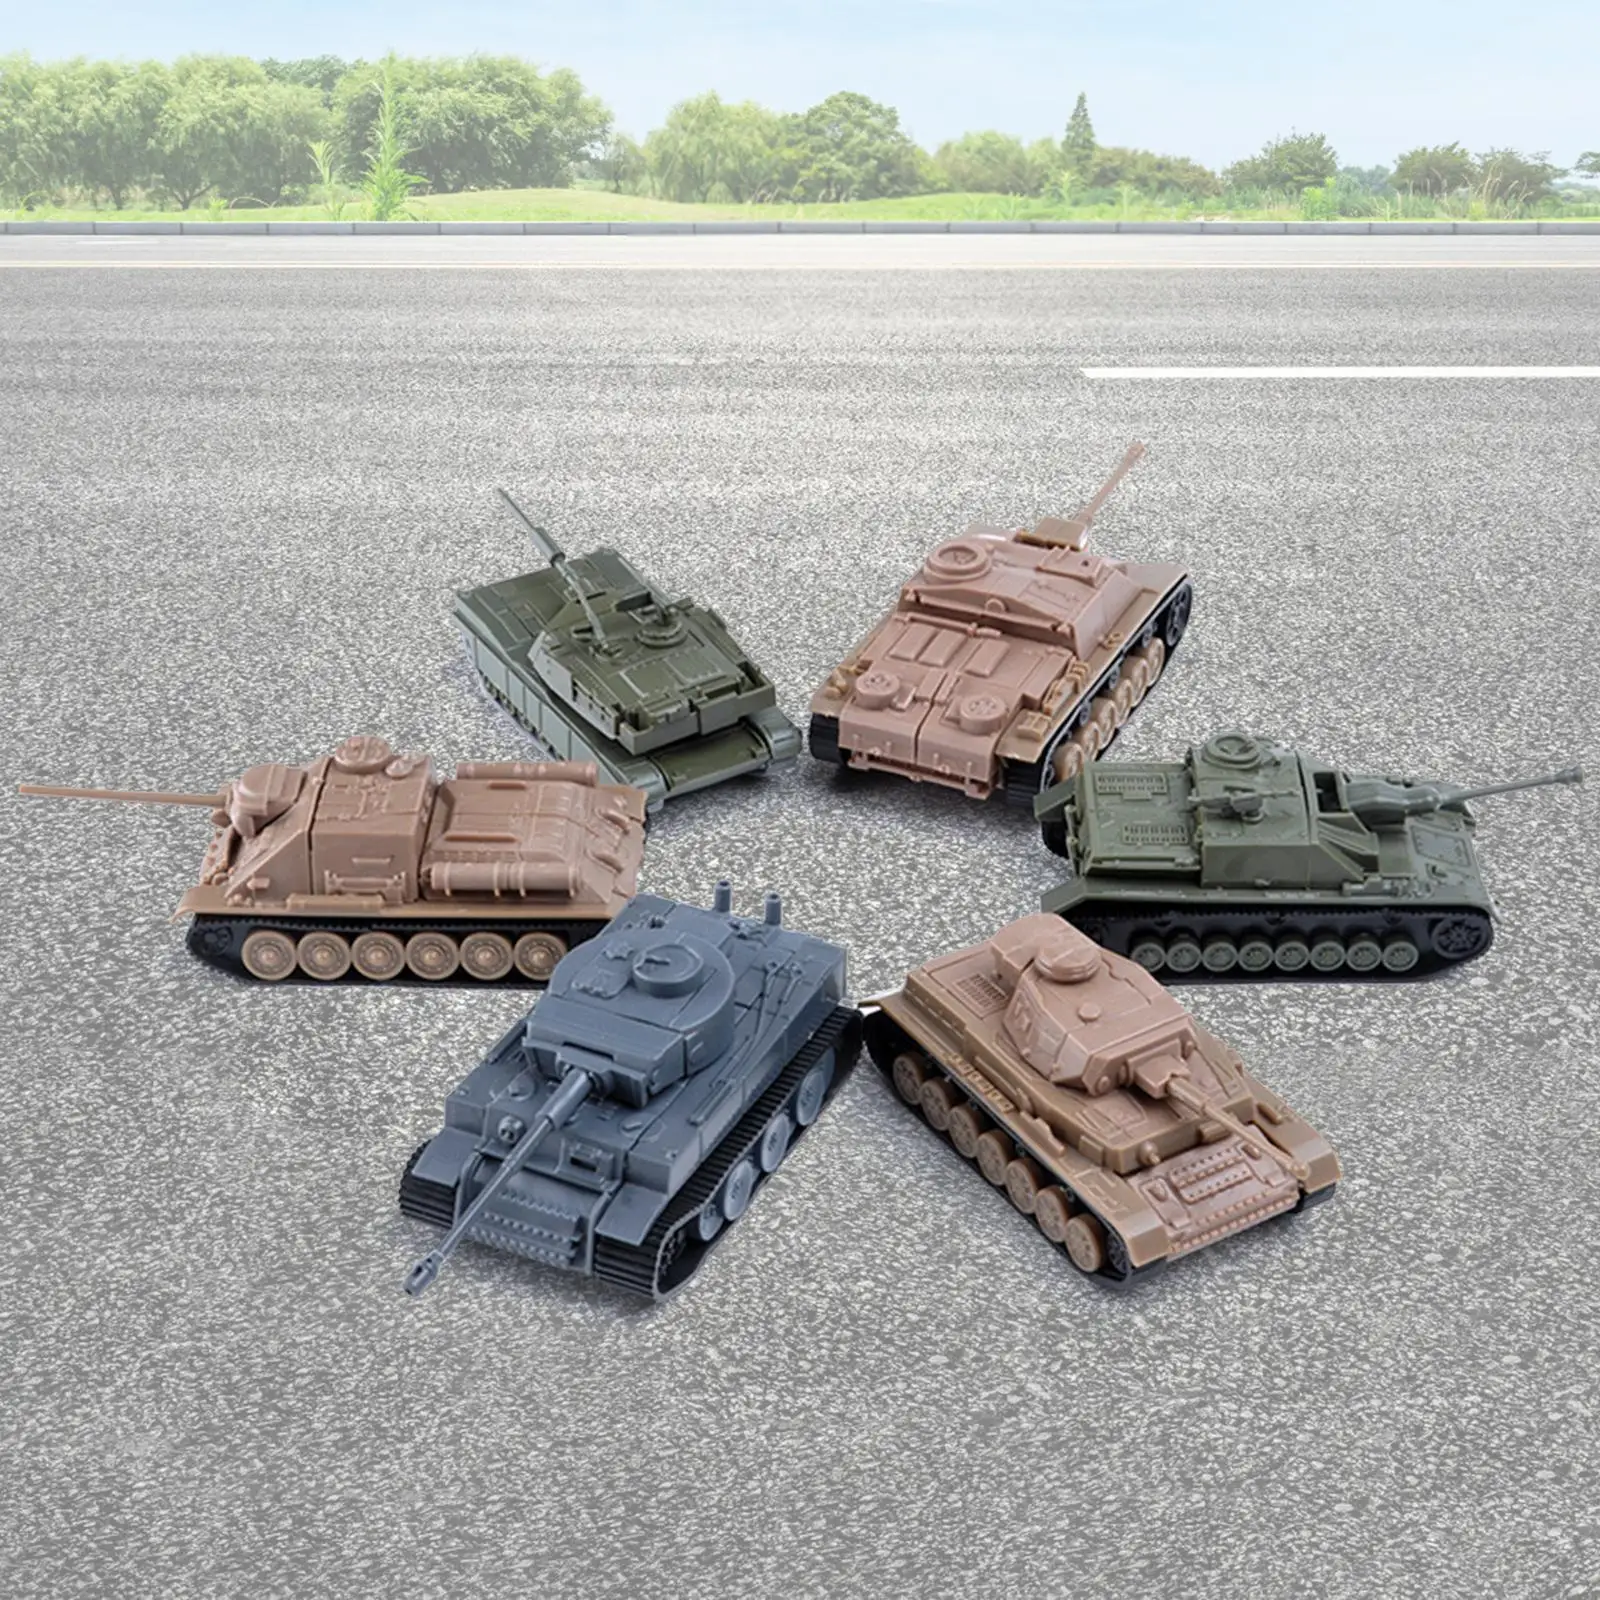 6 Pieces Tank Model DIY Assemble Collectibles Decorative Toys Military Display Party Favors Durable for Beginners Teenagers